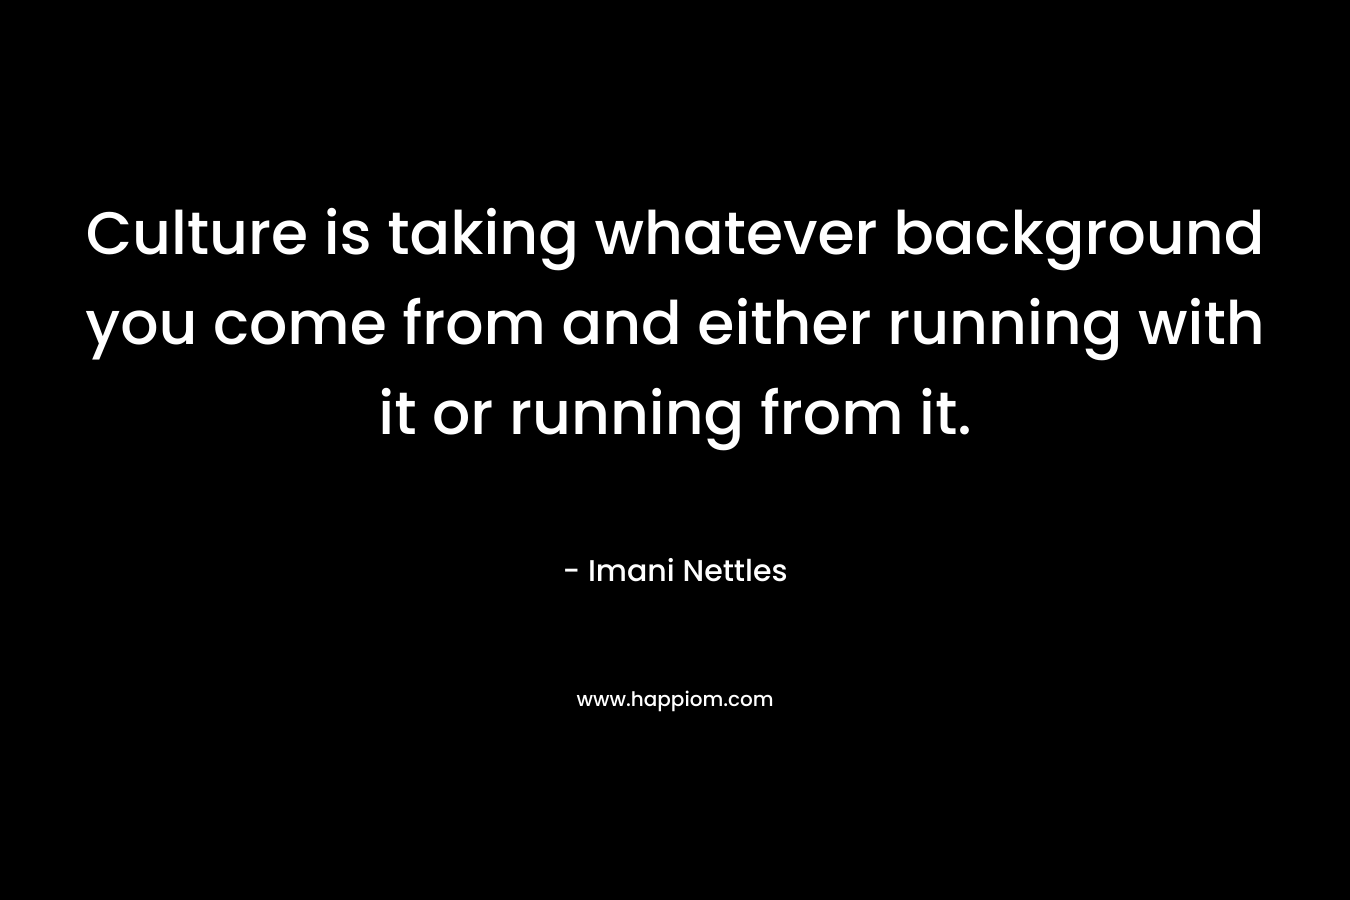 Culture is taking whatever background you come from and either running with it or running from it.